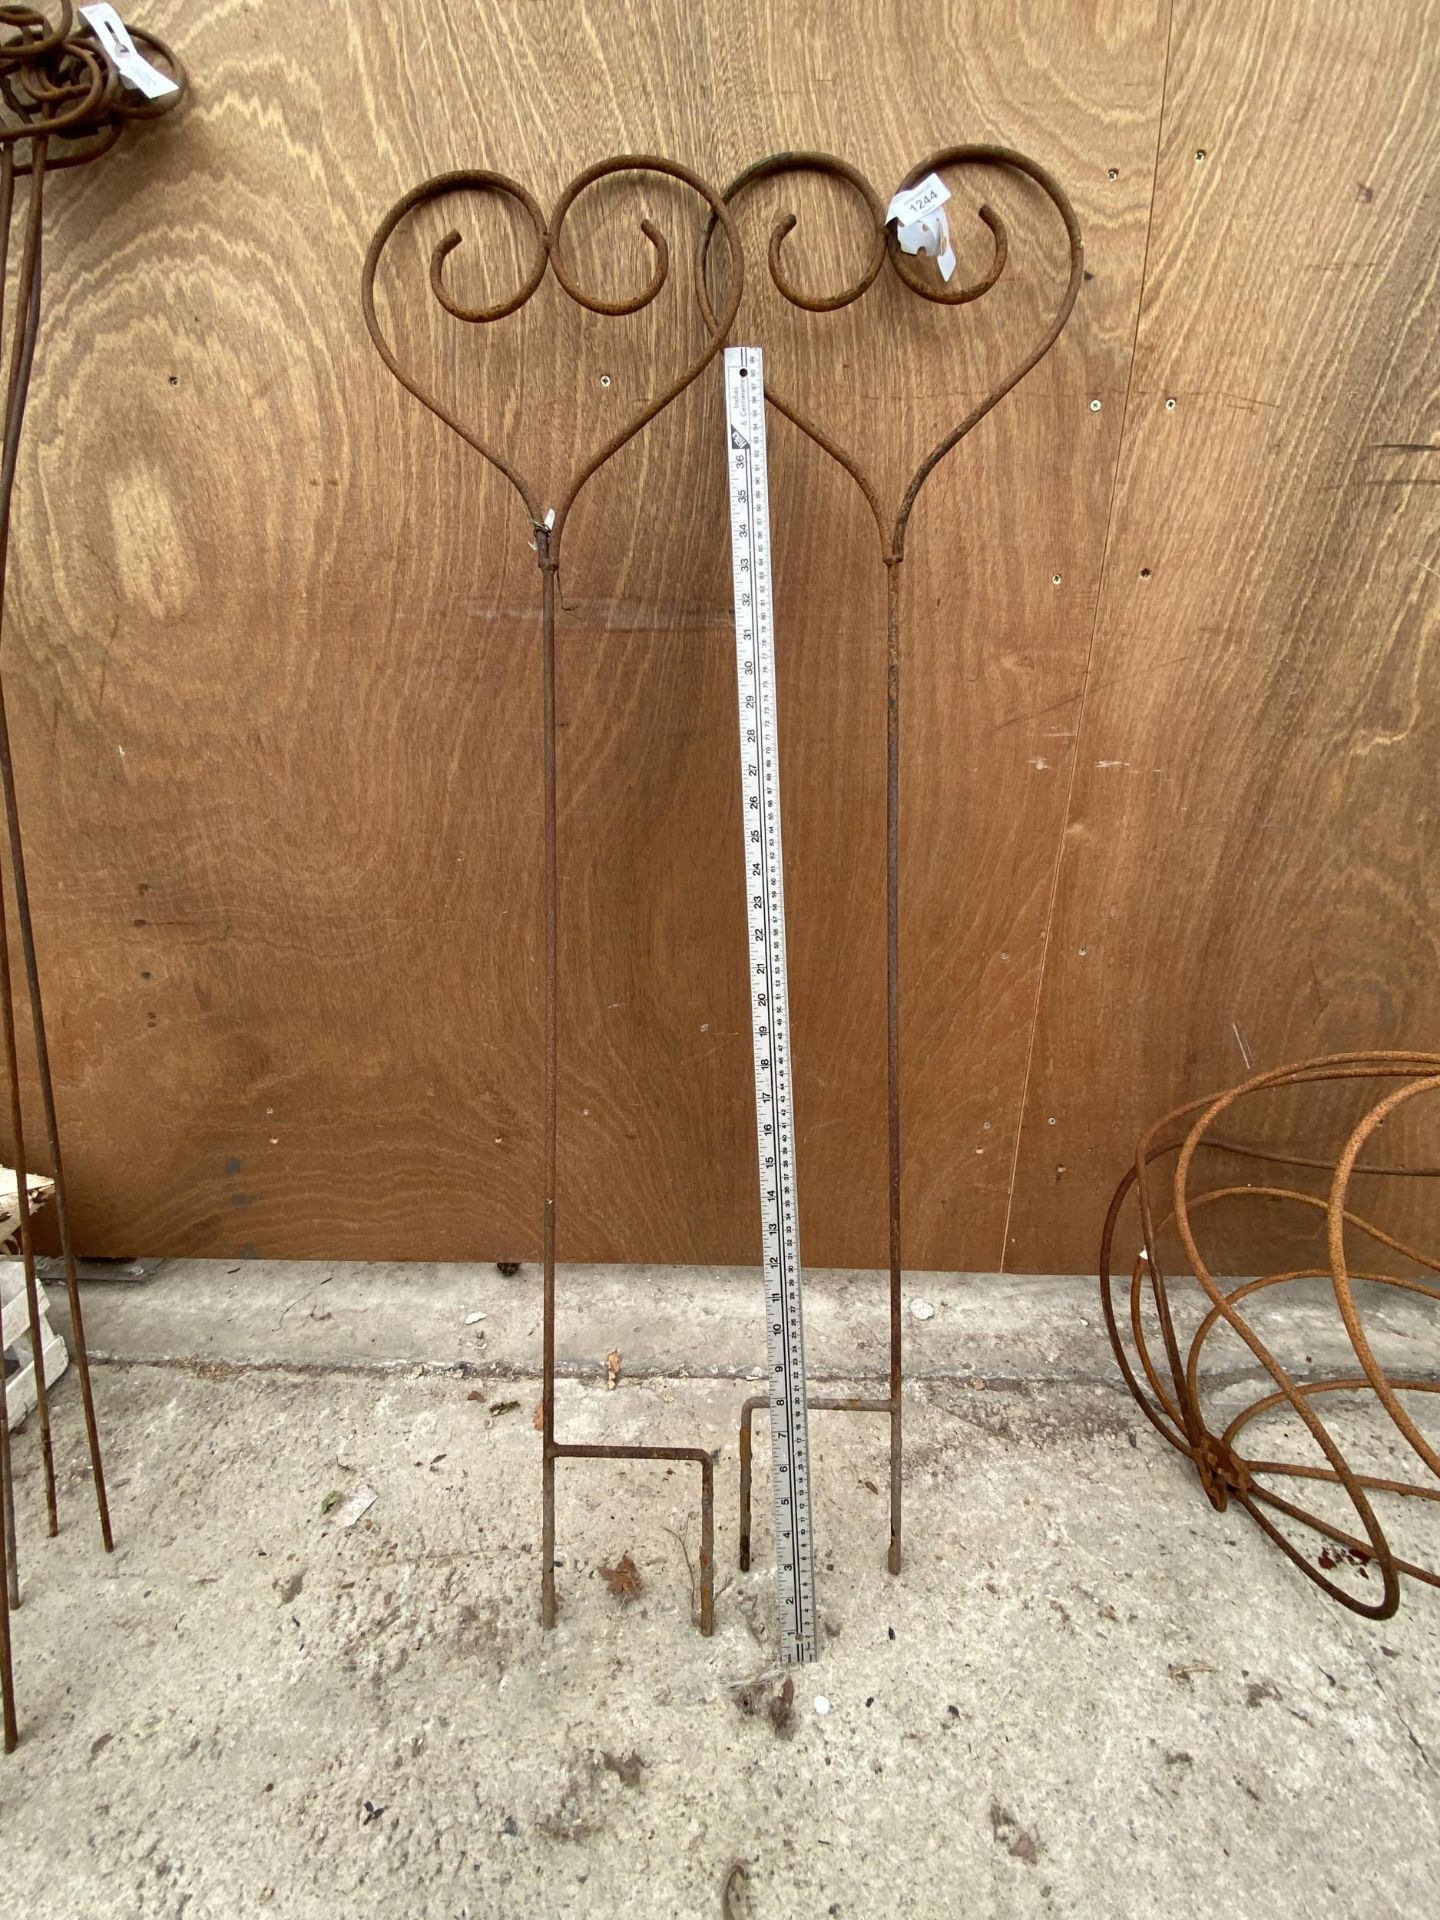 A PAIR OF SMALL HEART SHAPED WROUGHT IRON PLANT SUPPORTS/GARDEN FEATURES - Image 2 of 3